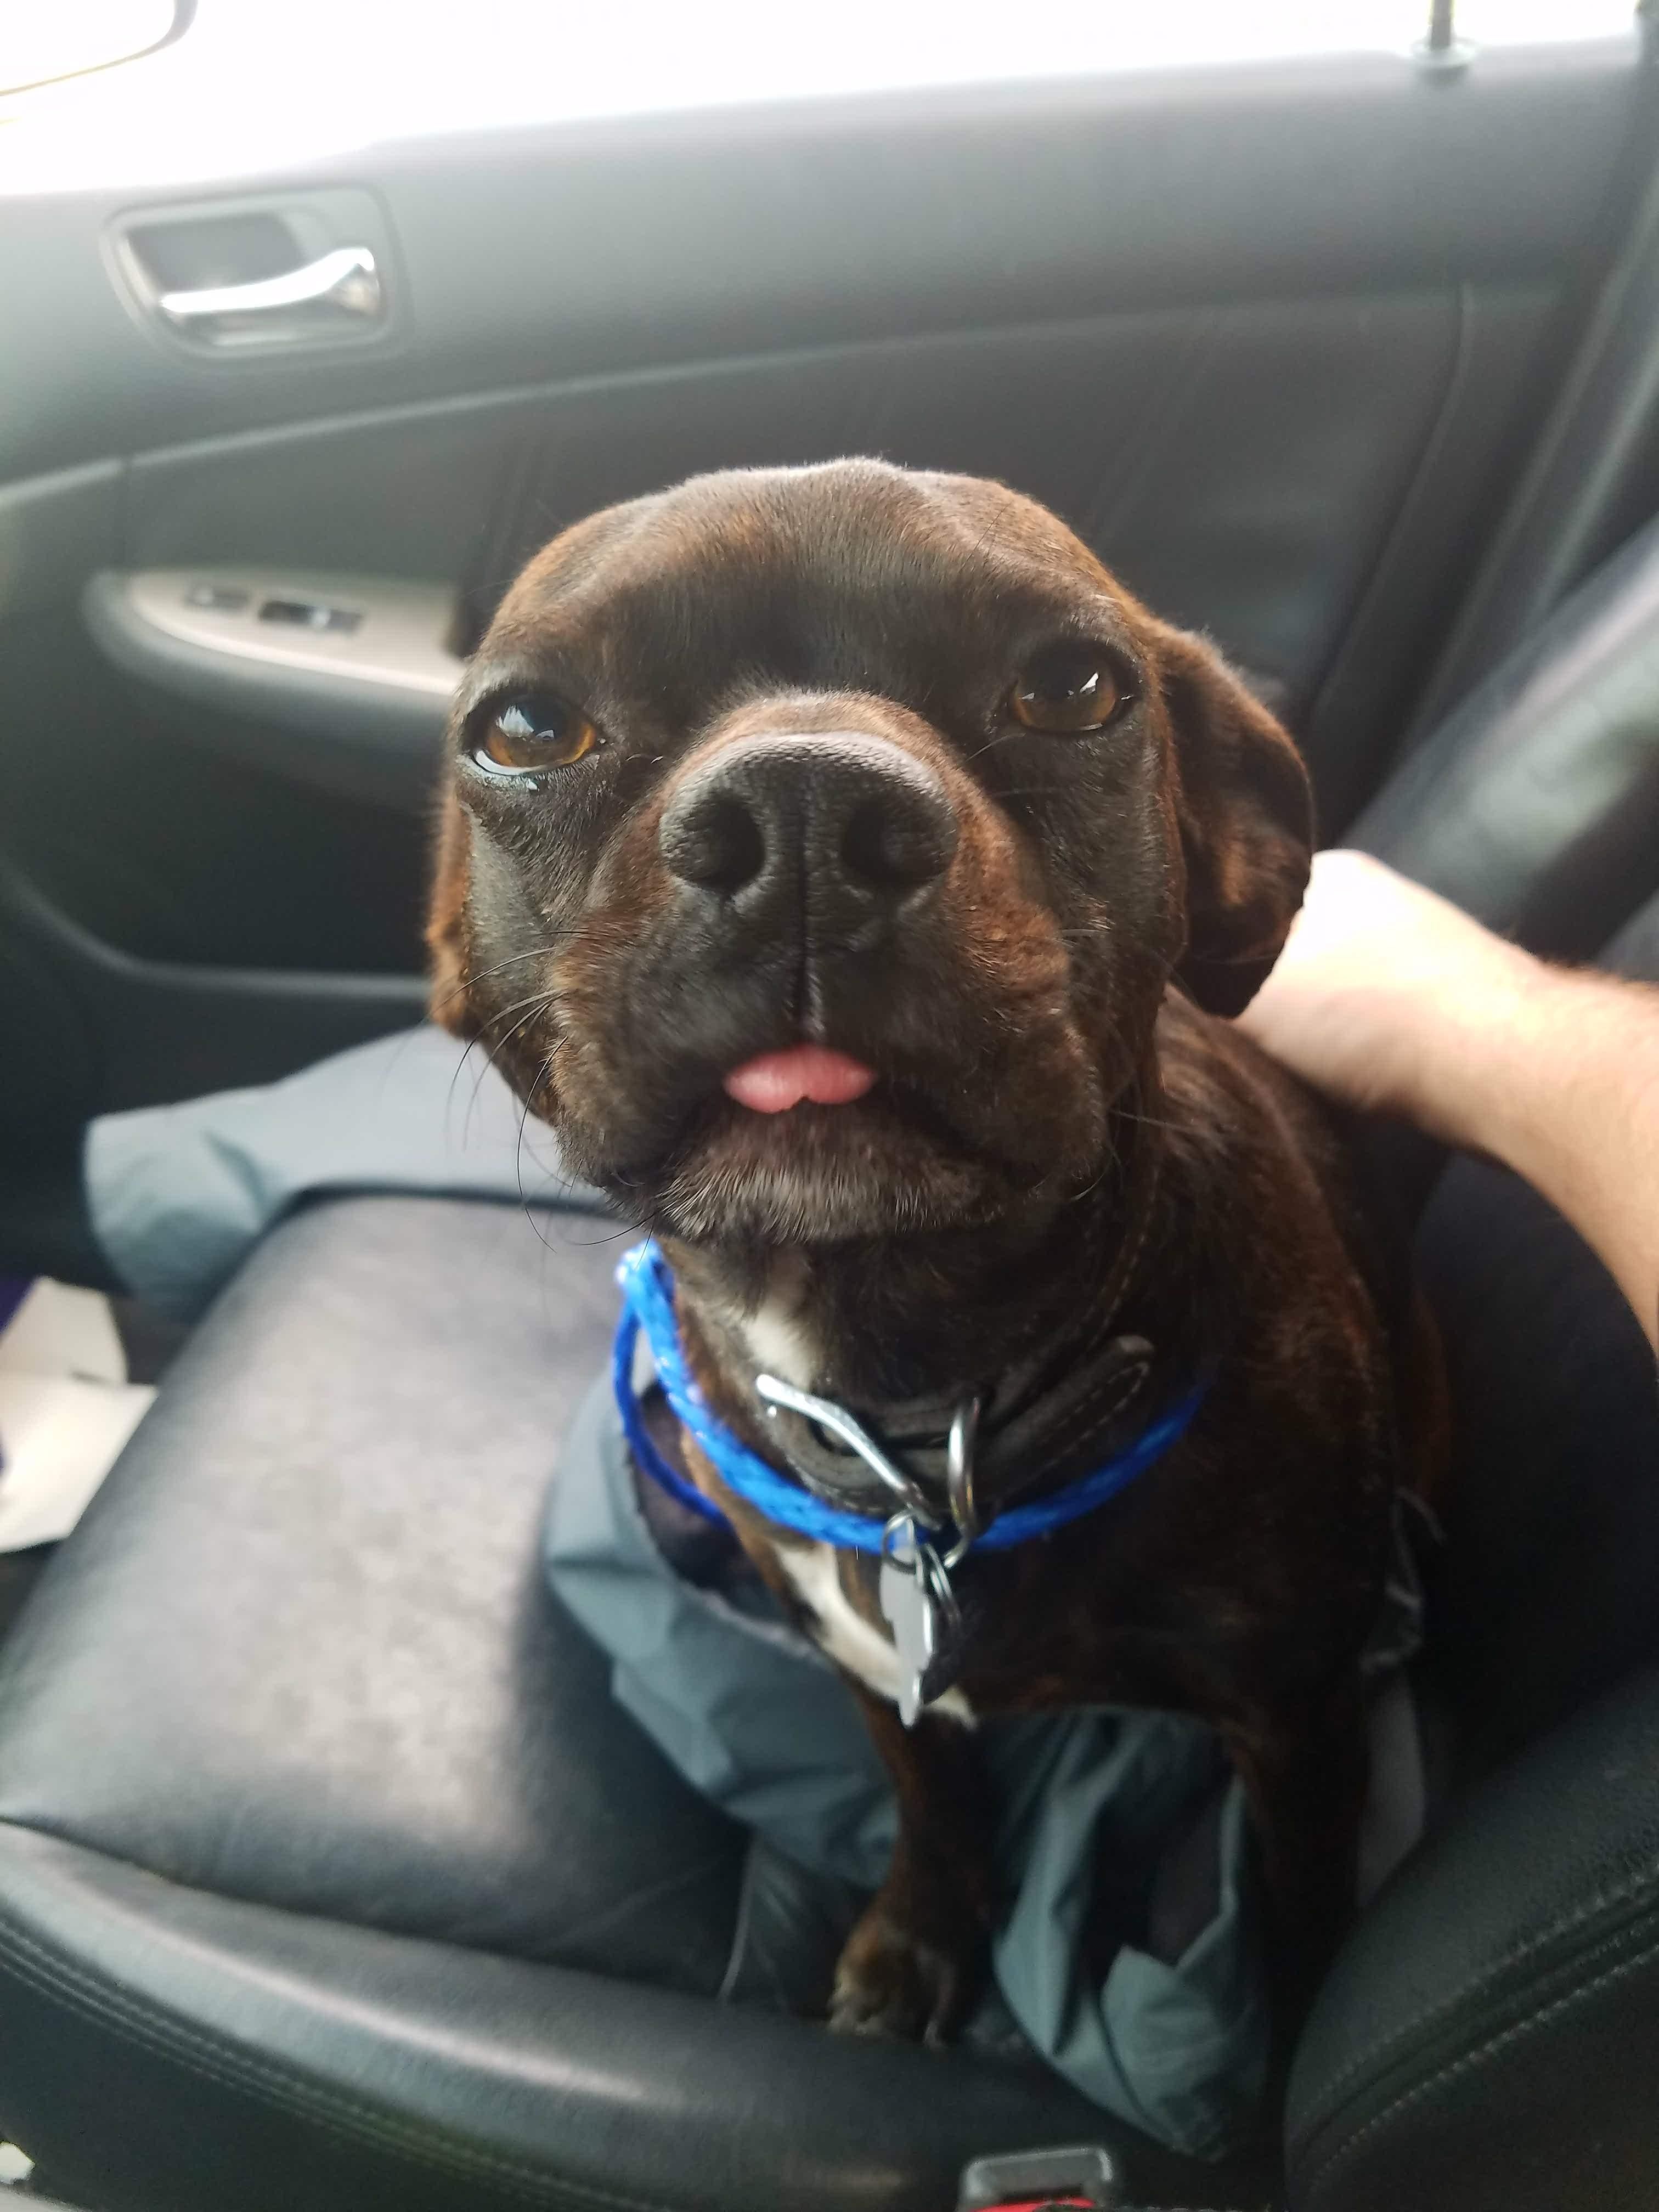 Somehow got out of my back yard and ended up at the pound... This is his "Thank you God, I was so terrified in there" face on the way home.